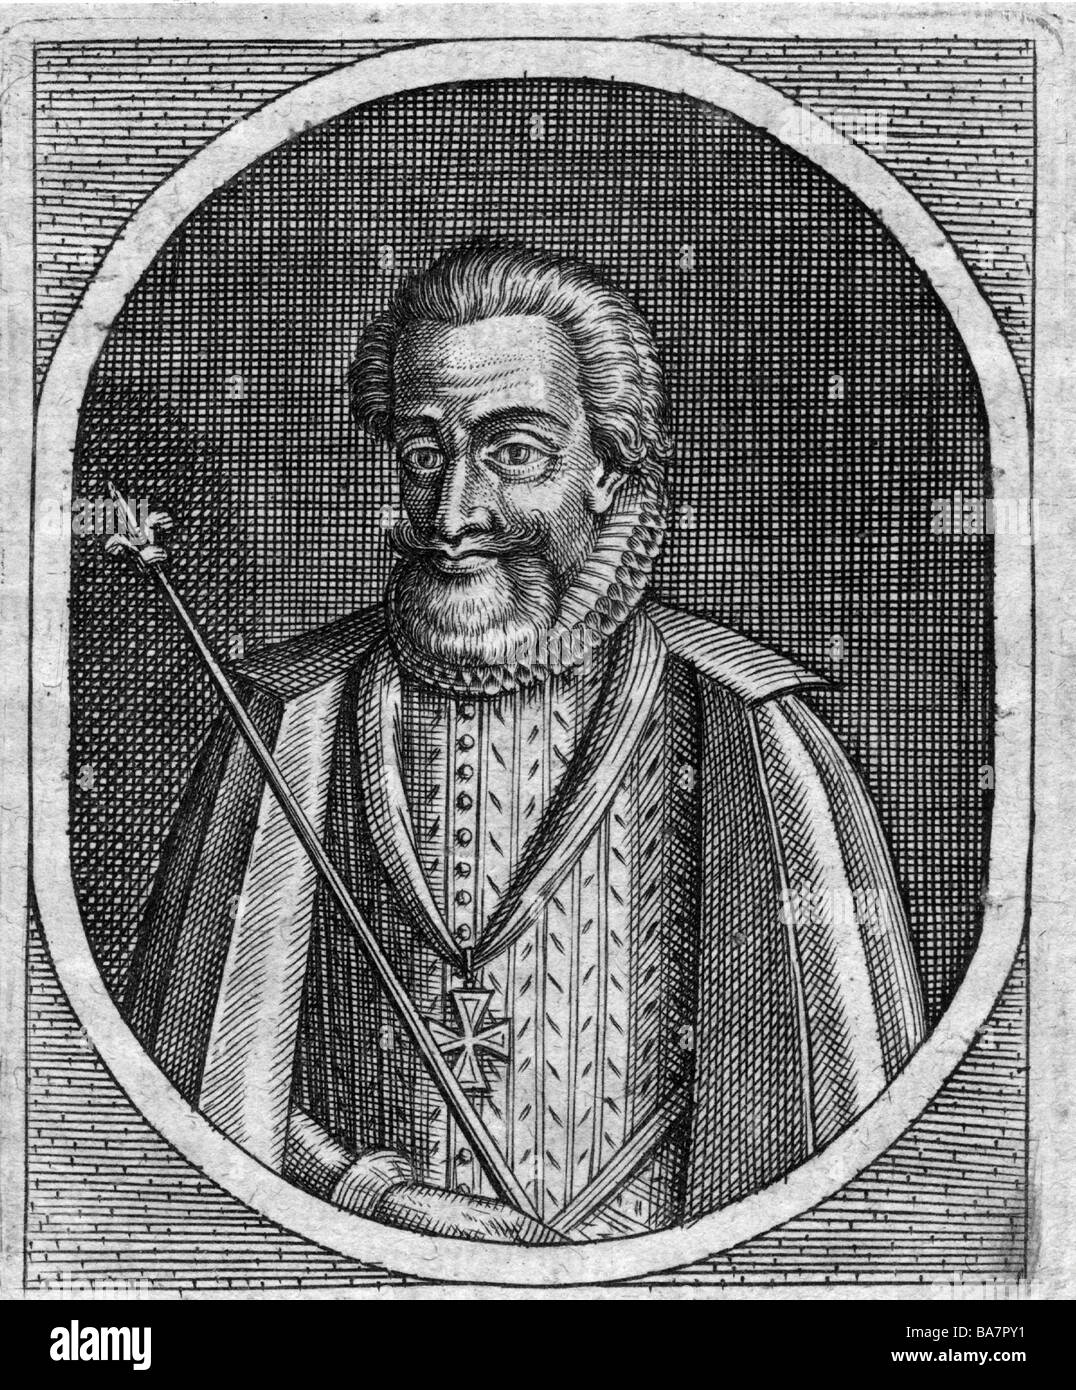 Henri IV, 13.12.1553 - 14.5.1610, King of France 27.2.1594 - 14.5.1610, portrait in allegory frame, contemporary copper engraving by anonymous, circa 1600, Artist's Copyright has not to be cleared Stock Photo